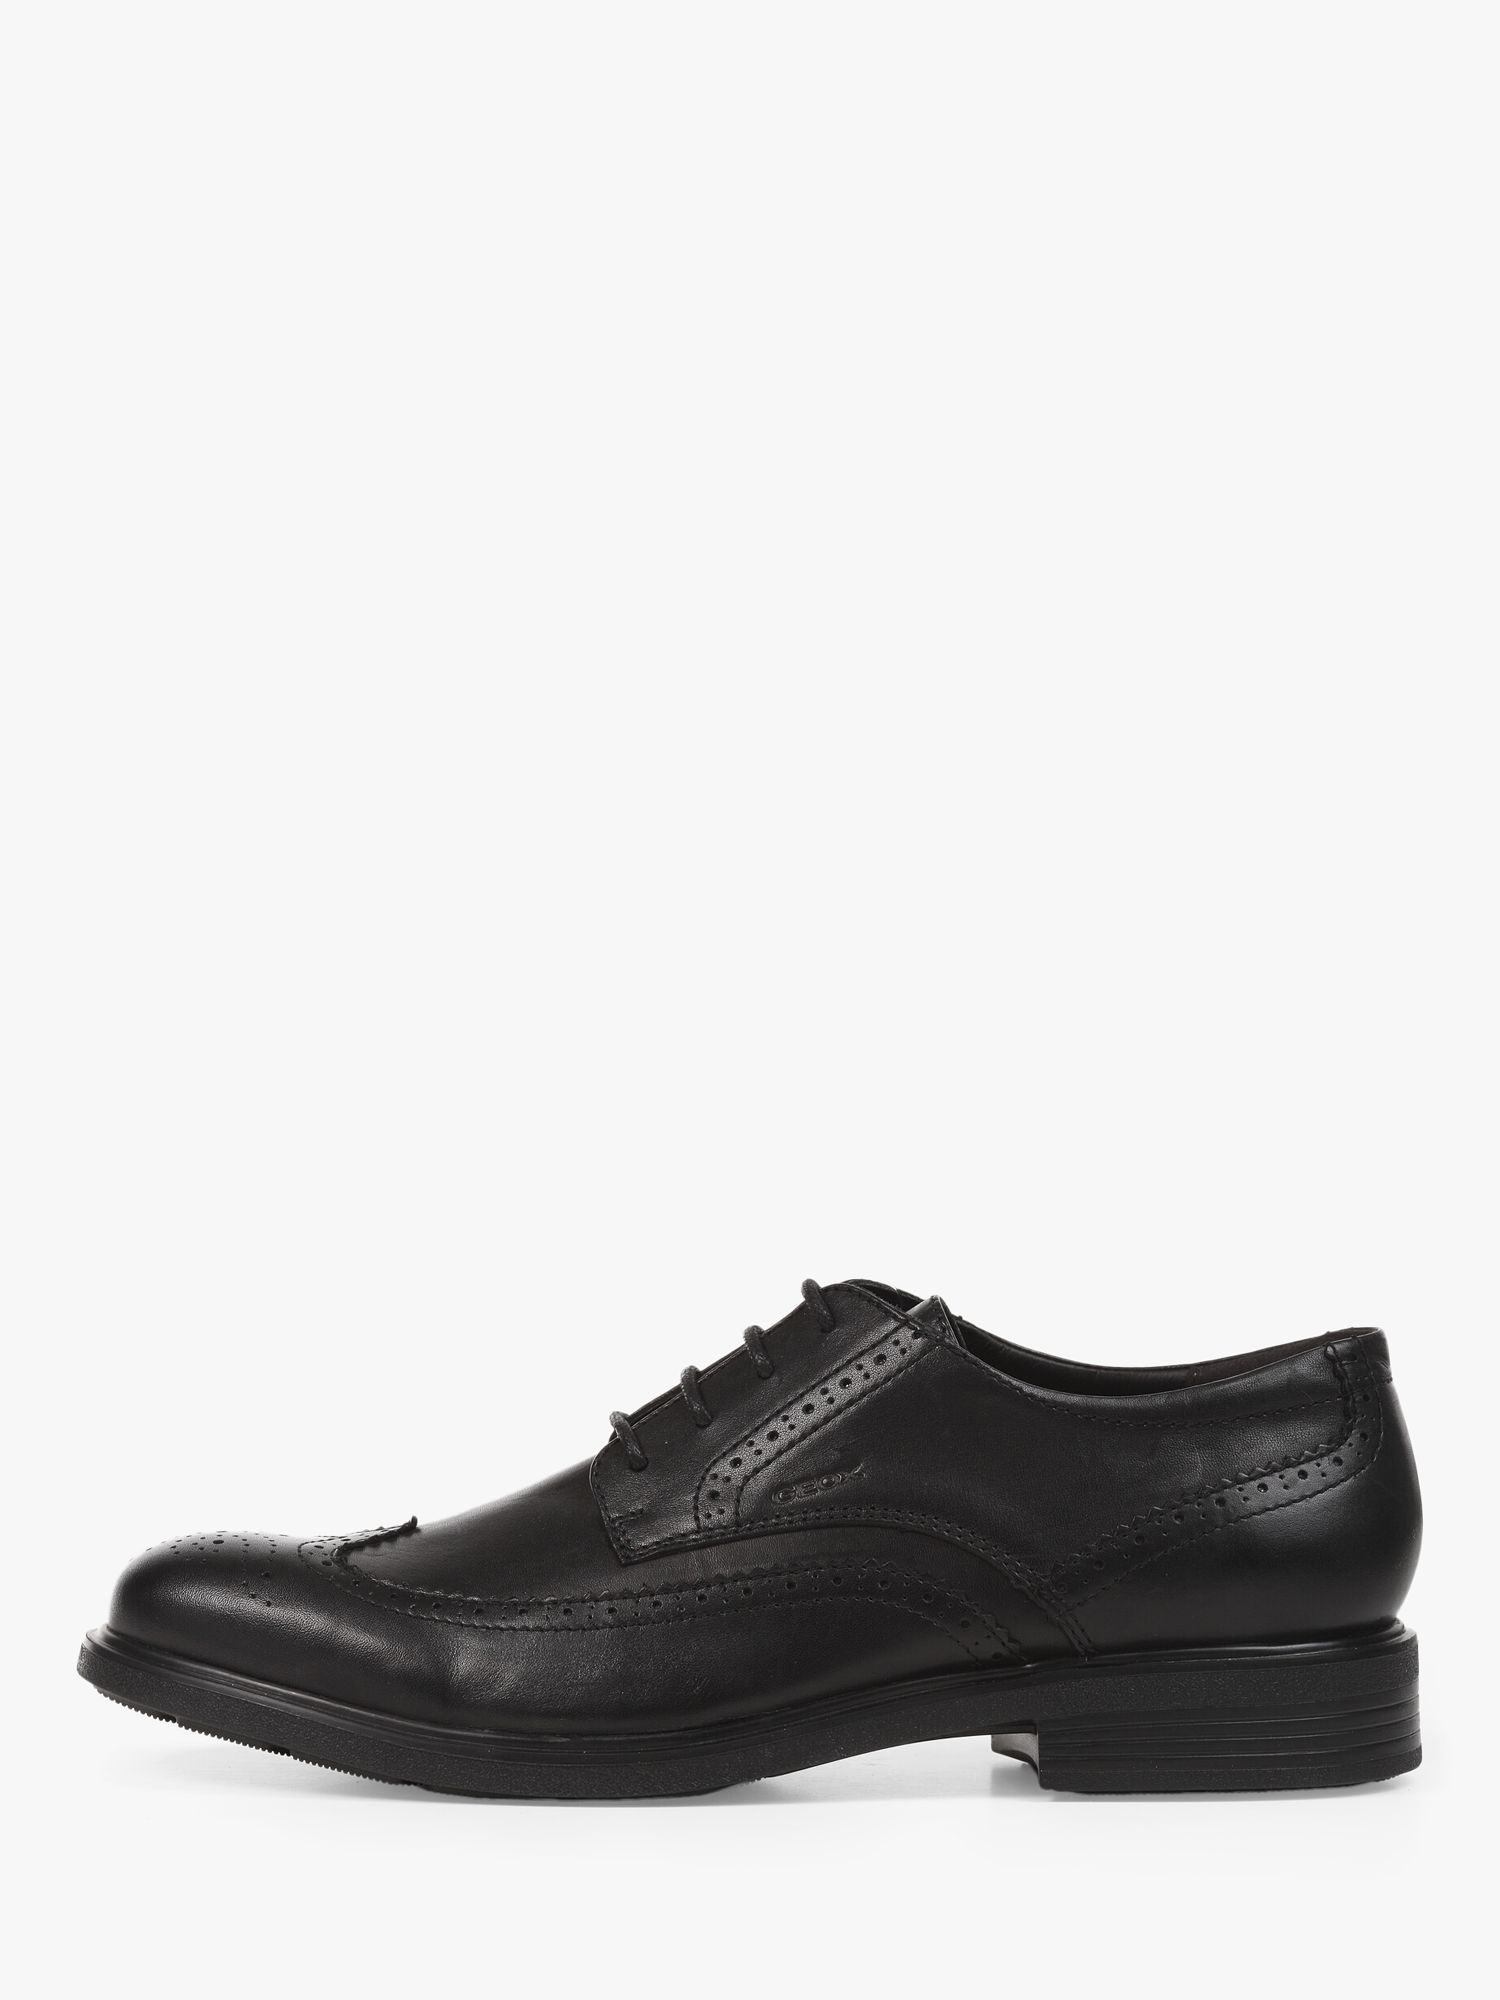 Geox Derby Shoes, Black at John Lewis & Partners